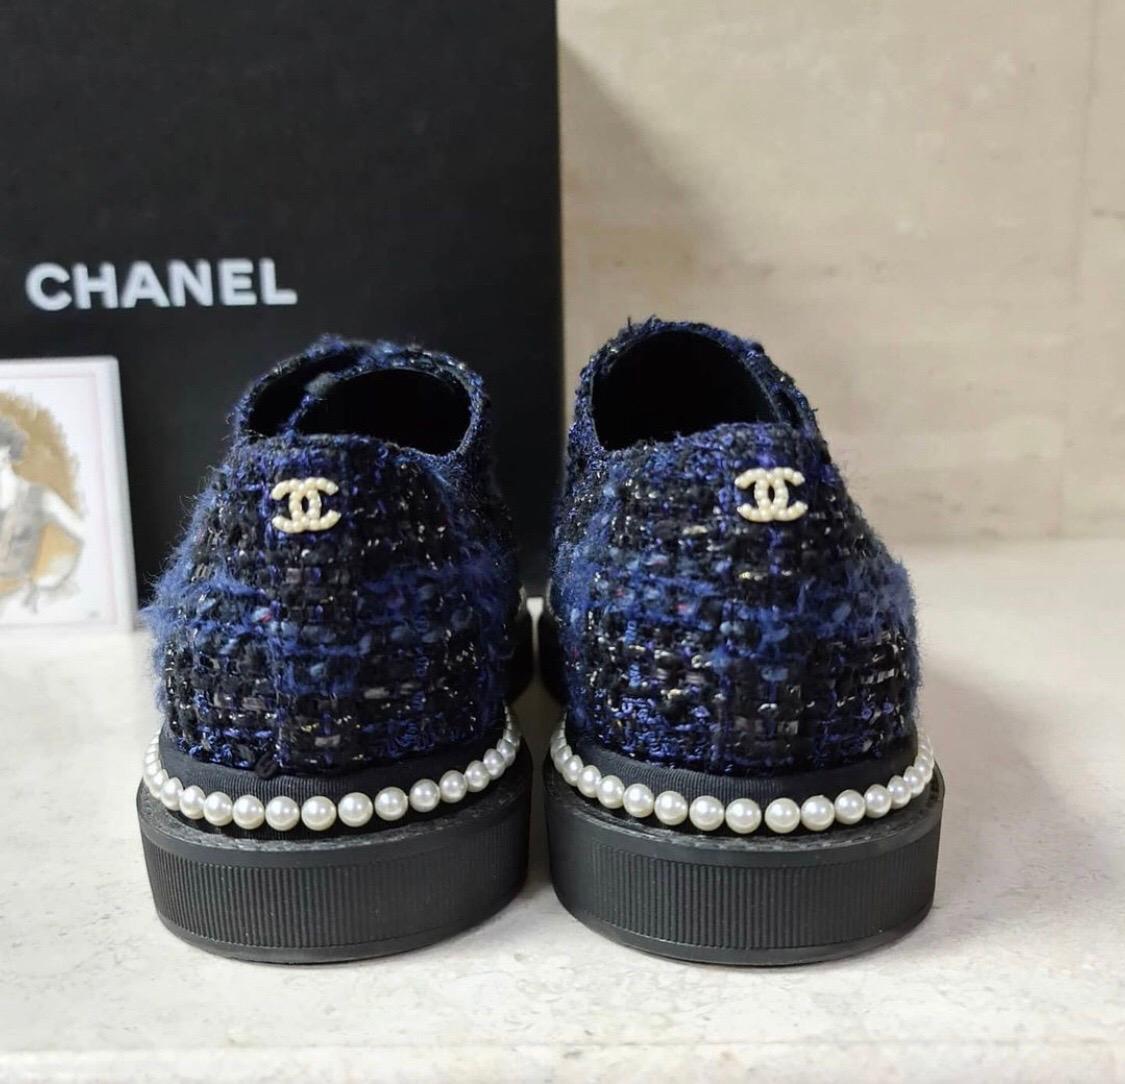 Chanel 17P Black Navy Tweed Pearl CC Logo Lace Up Flat Trainer

Lace up tie front

Chanel CC back pearl logo

Black grosgrain cap toe

Black navy blue tweed fabric material

Pearl trim around perimeter

Pearl detail lace up rings

Sz 38,5

Condition